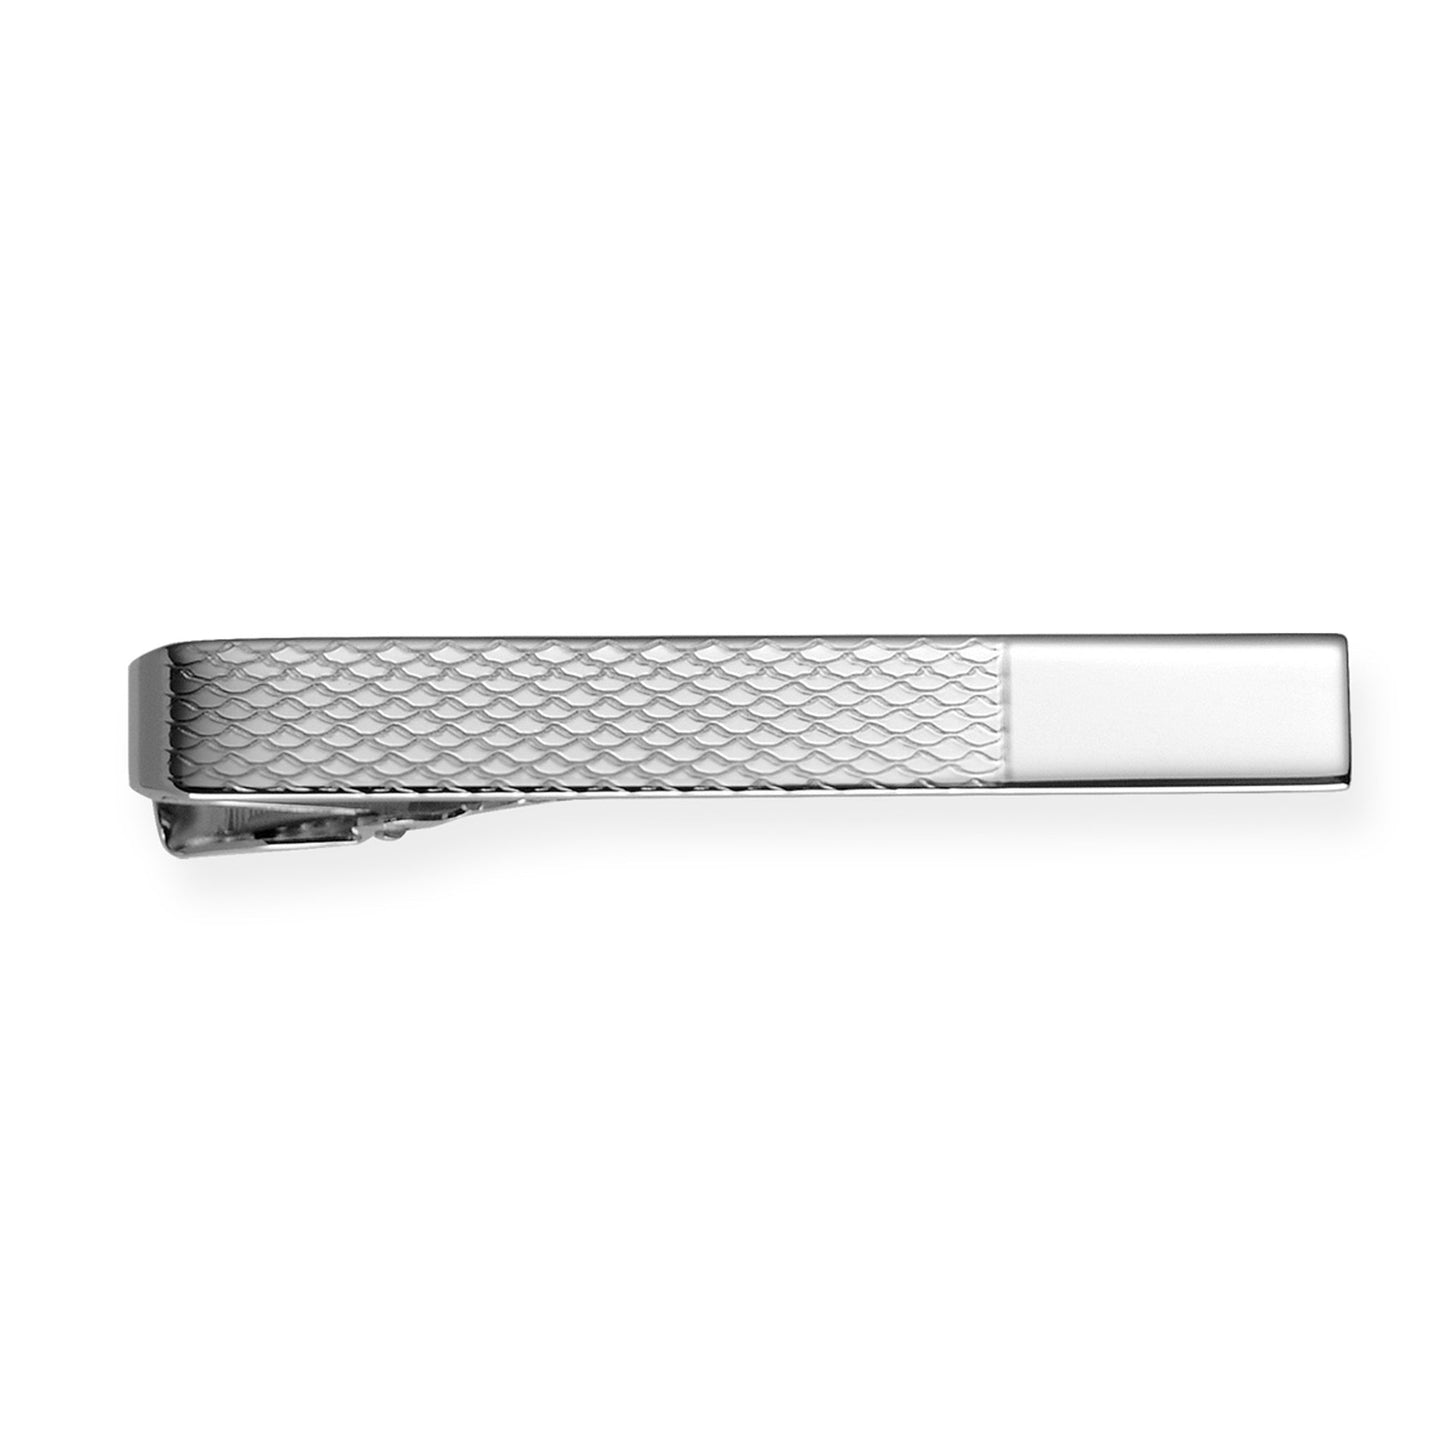 A sterling silver engine-turned polished tie bar displayed on a neutral white background.